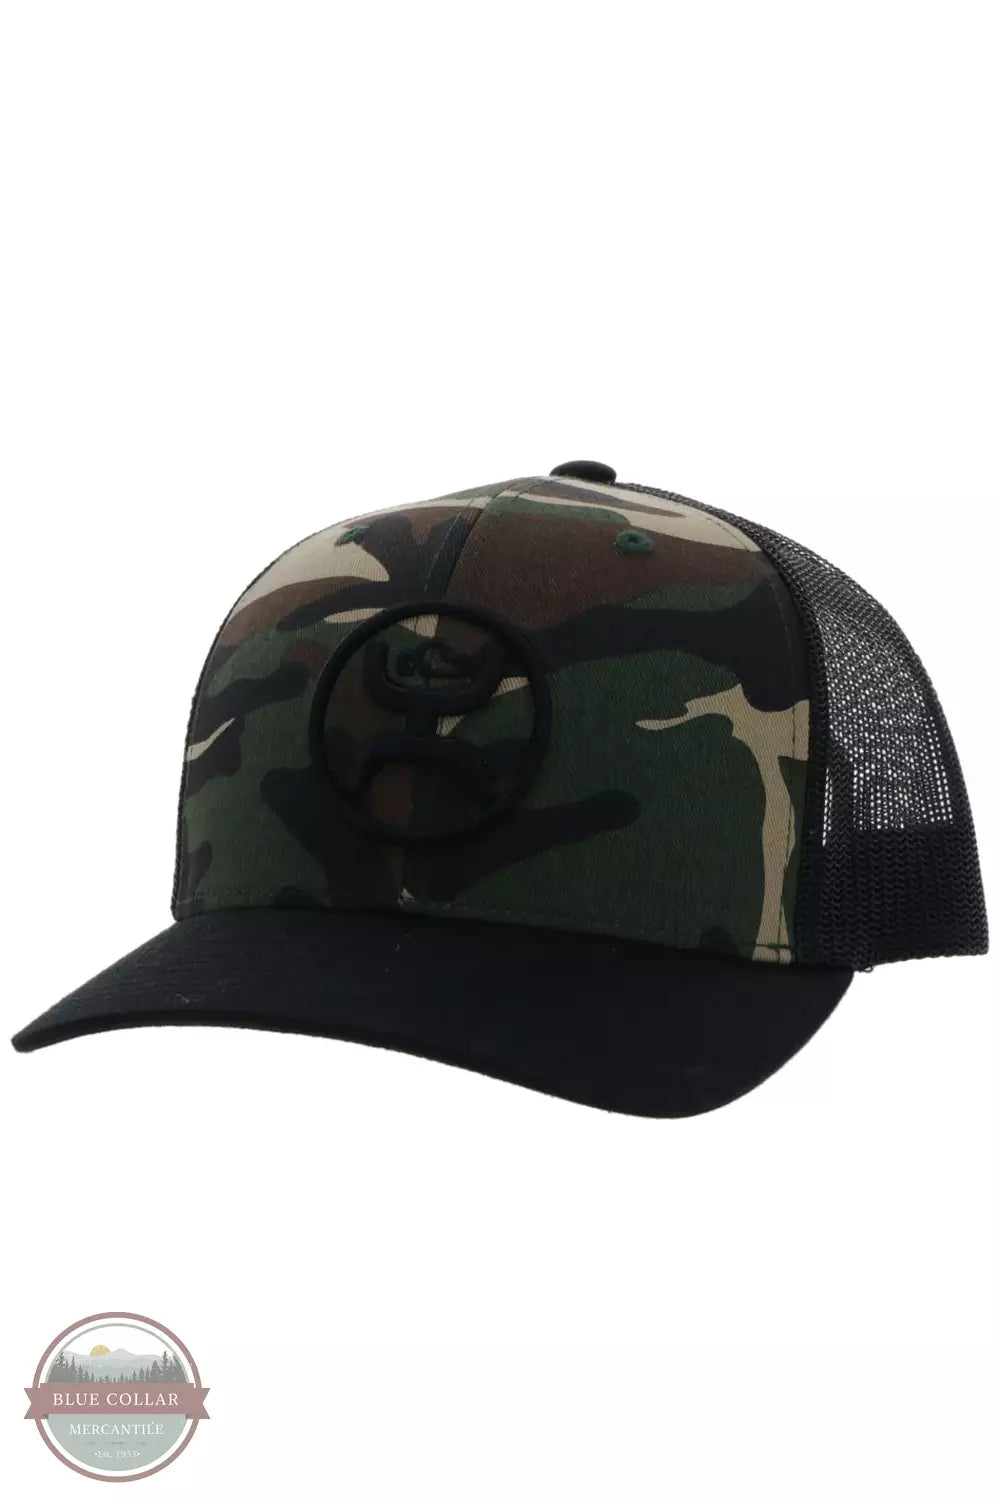 Hooey 2309T O Classic Cap with Logo Camo / Black Front View